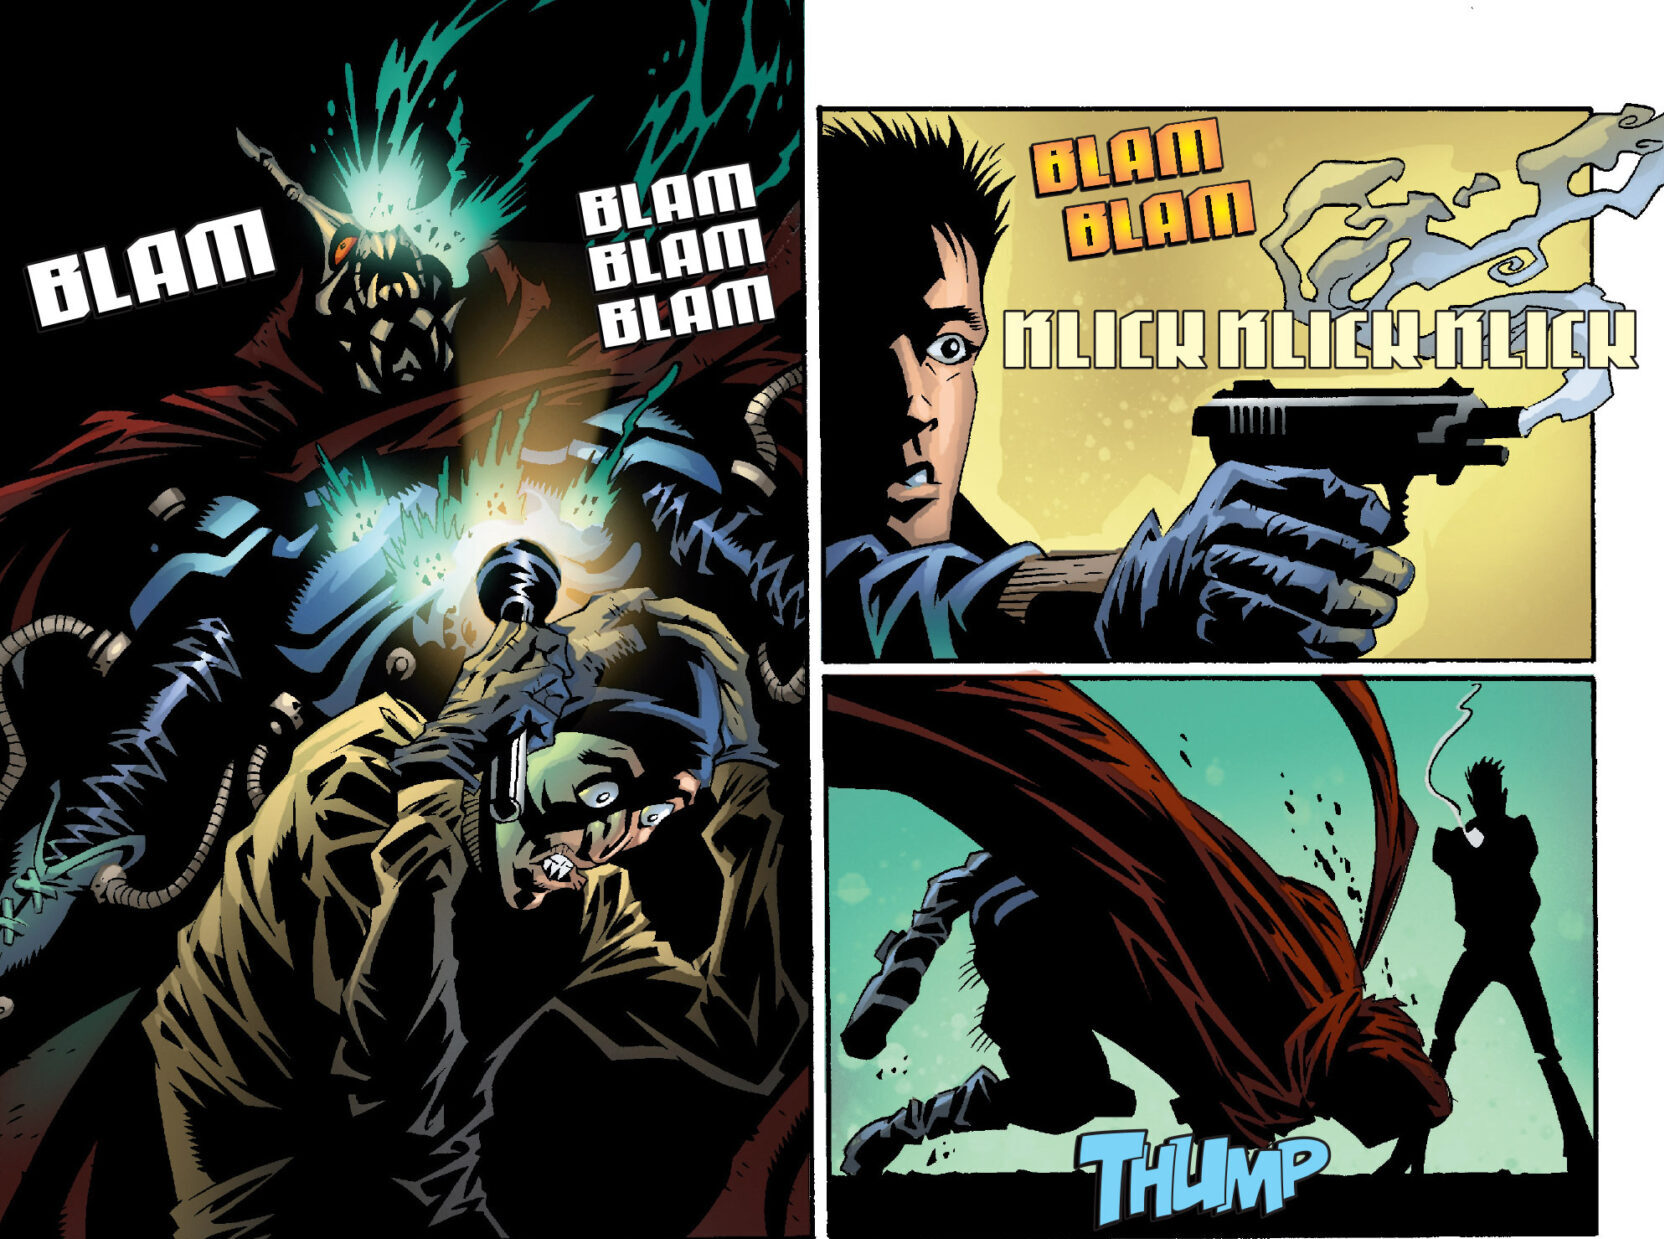 Parker Robbins makes a split second decision in The Hood Vol. 1 #1 "Blood From Stones Chapter 1" (2002), Marvel Comics. Words by Brian K. Vaughan, art by Kyle Hotz, Eric Powell, Brian Haberlin, and Randy Gentile.